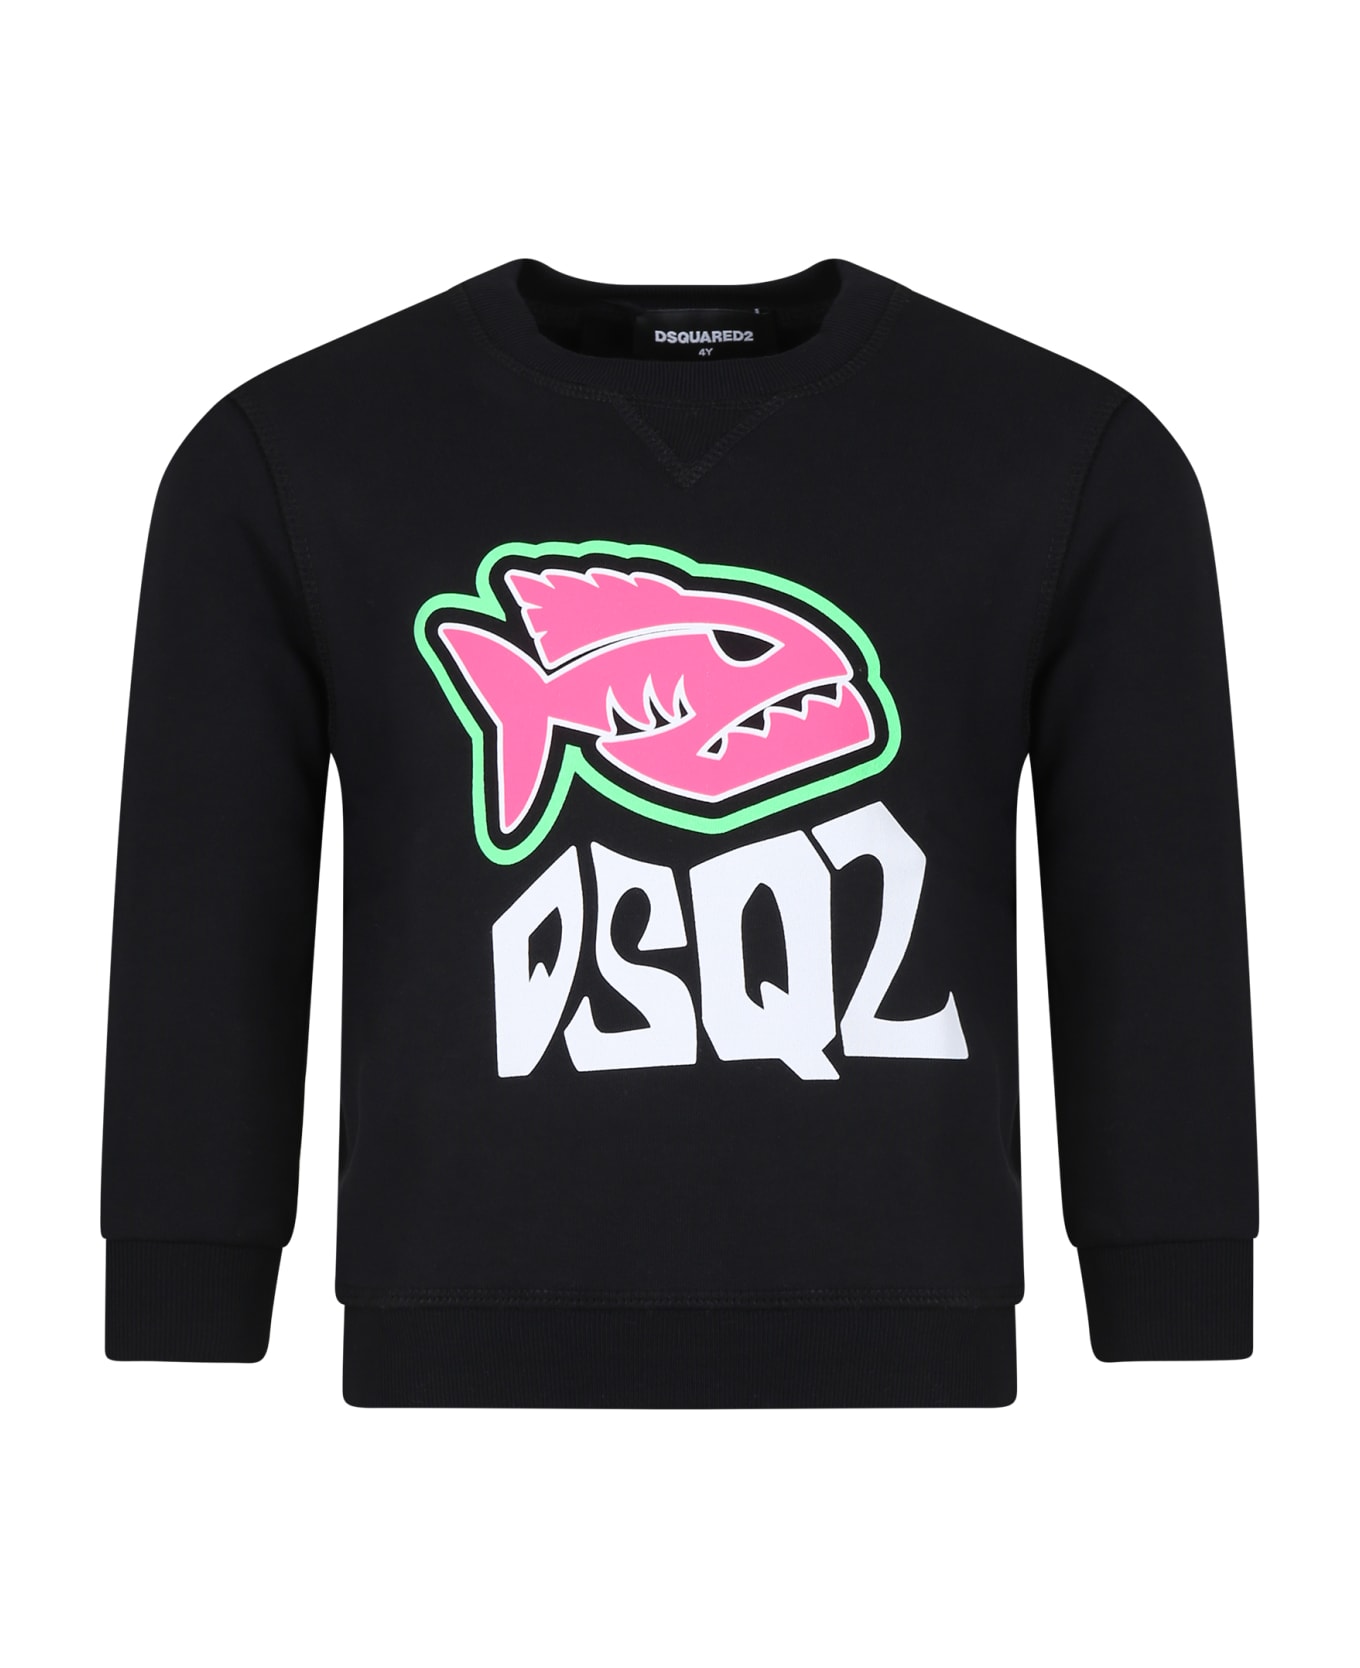 Dsquared2 Black Sweatshirt For Boy With Logo And Print - Black